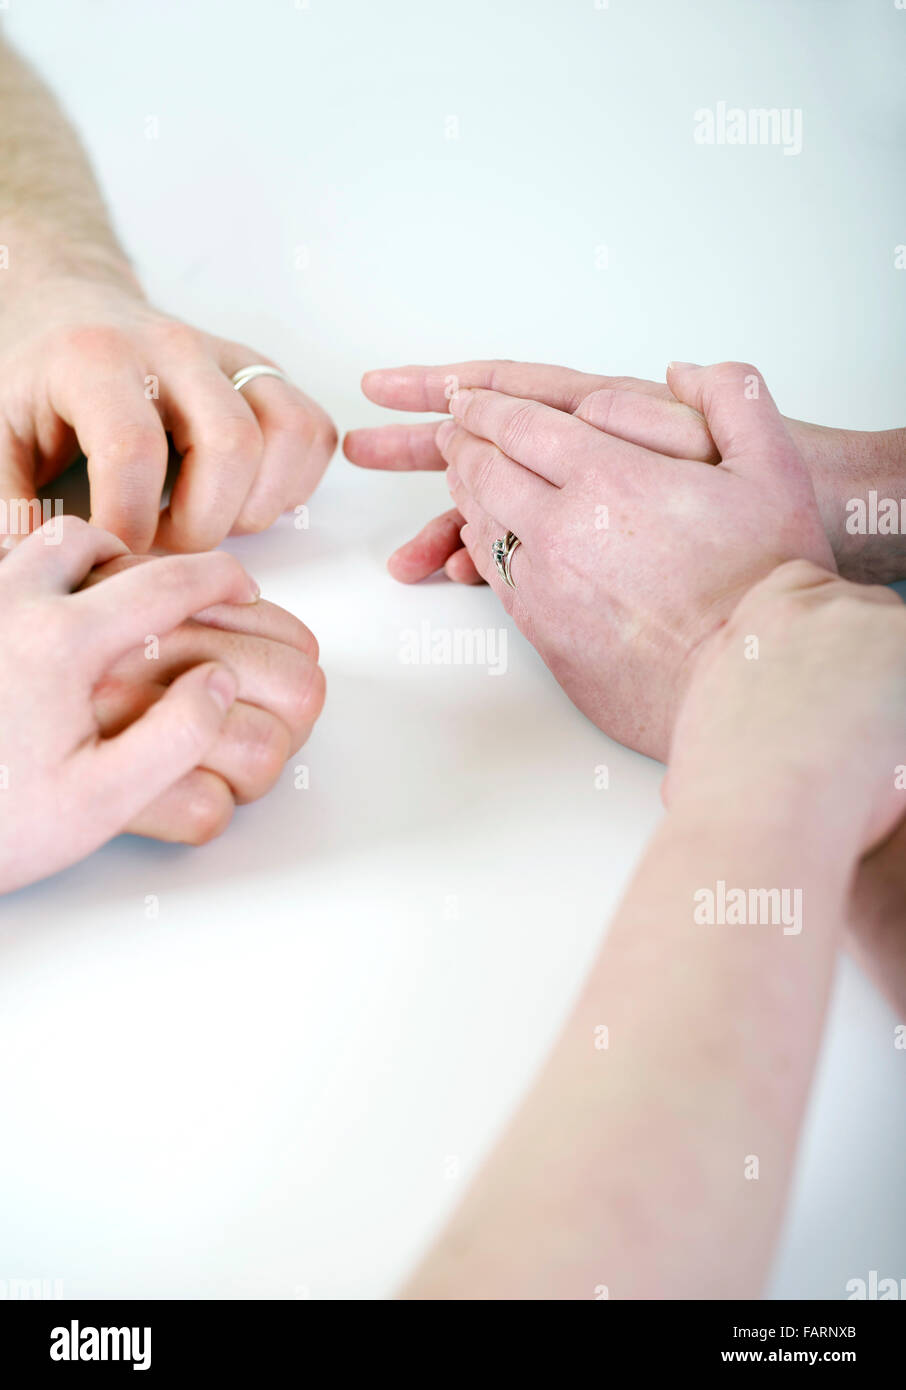 Child holds the hands of mother and father during a fragmented and strained relationship Stock Photo